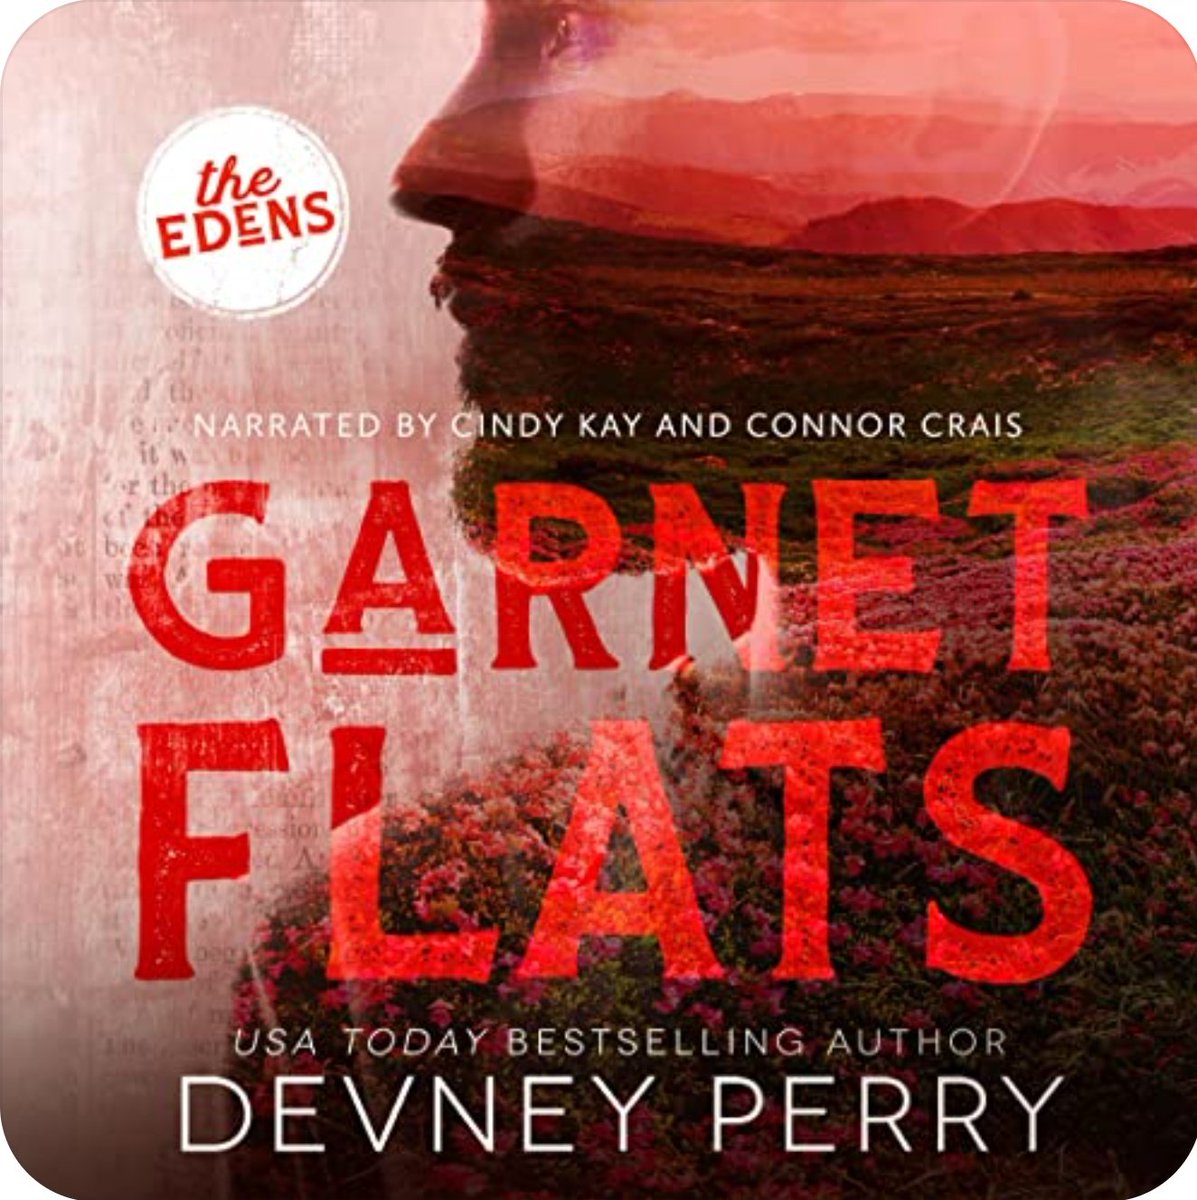 Hello my lovely #Bookfriends if you are a fan of @devneyperry books and you should...specially the The Edens series, the next one Garnet Flats is out for preorder. Will be narrated by @CindyKay_VO and  @ConnorCrais 
Release day 07/26.
I can't wait for Talia and Foster story 🙌